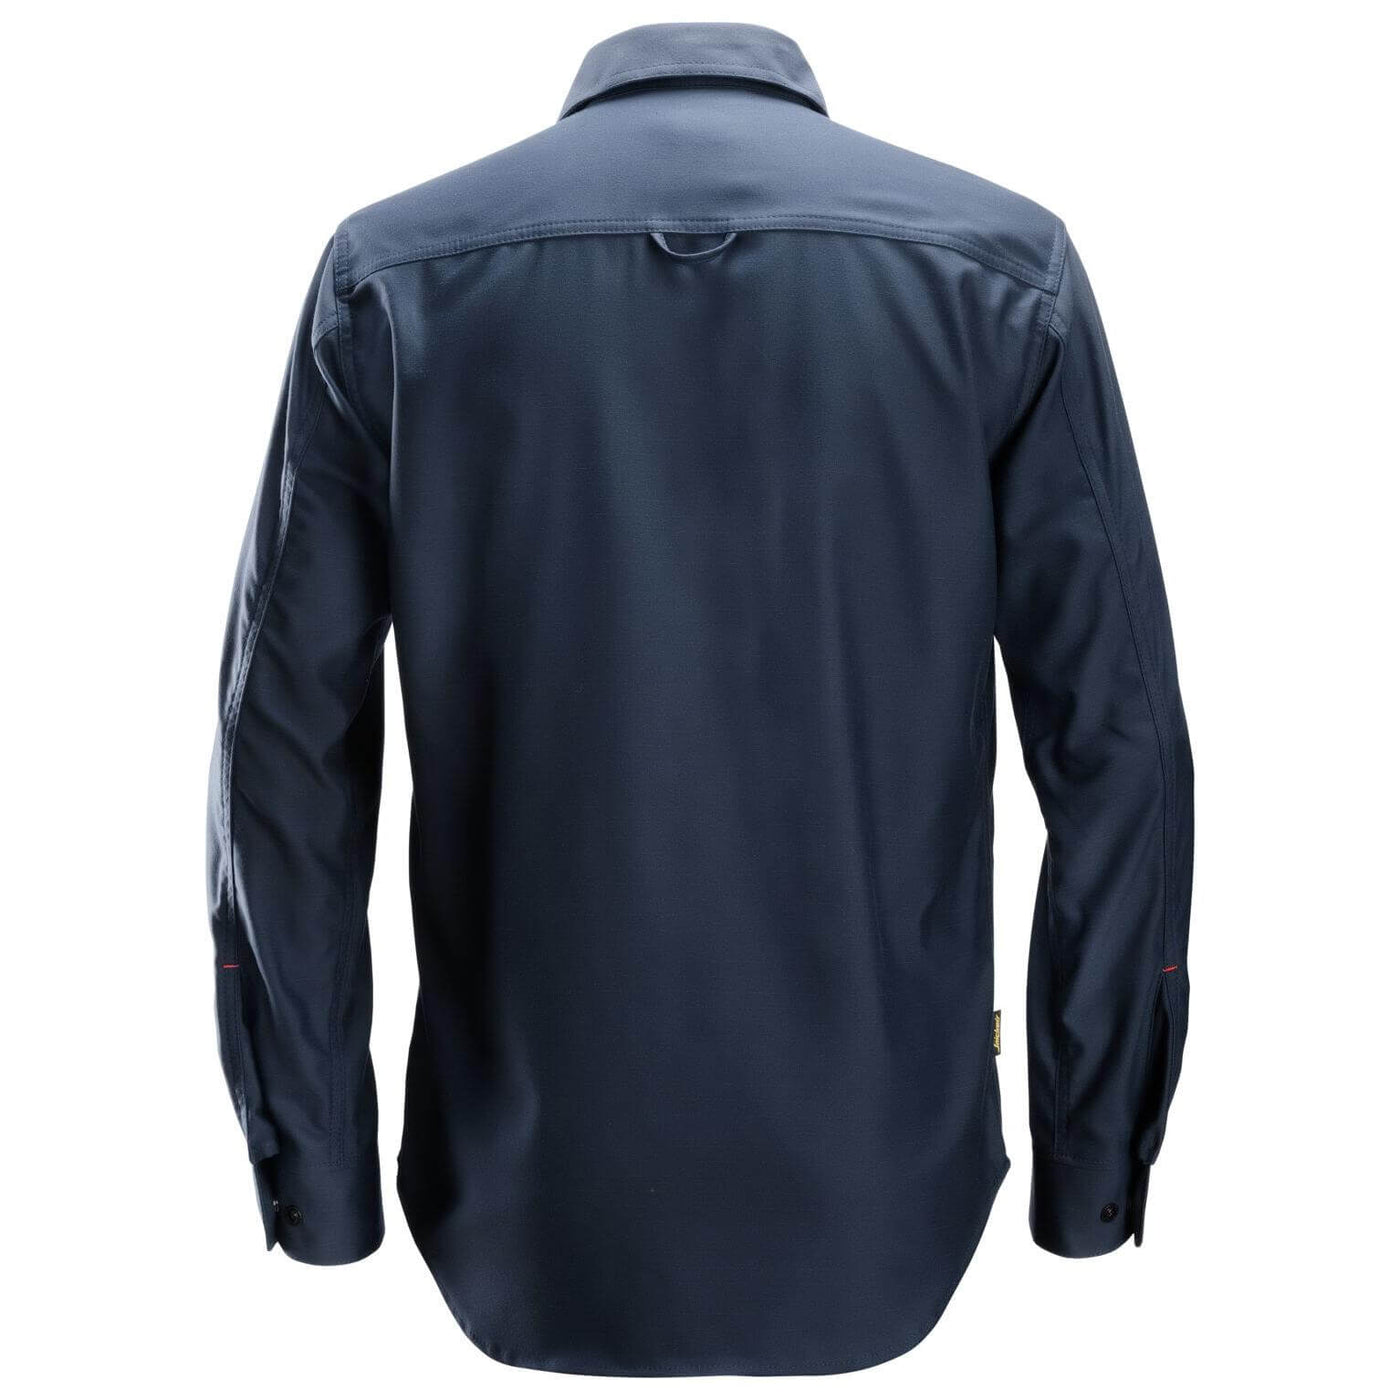 Snickers 8561 ProtecWork Flame reatardant Long Sleeve Shirt Navy Back #colour_navy